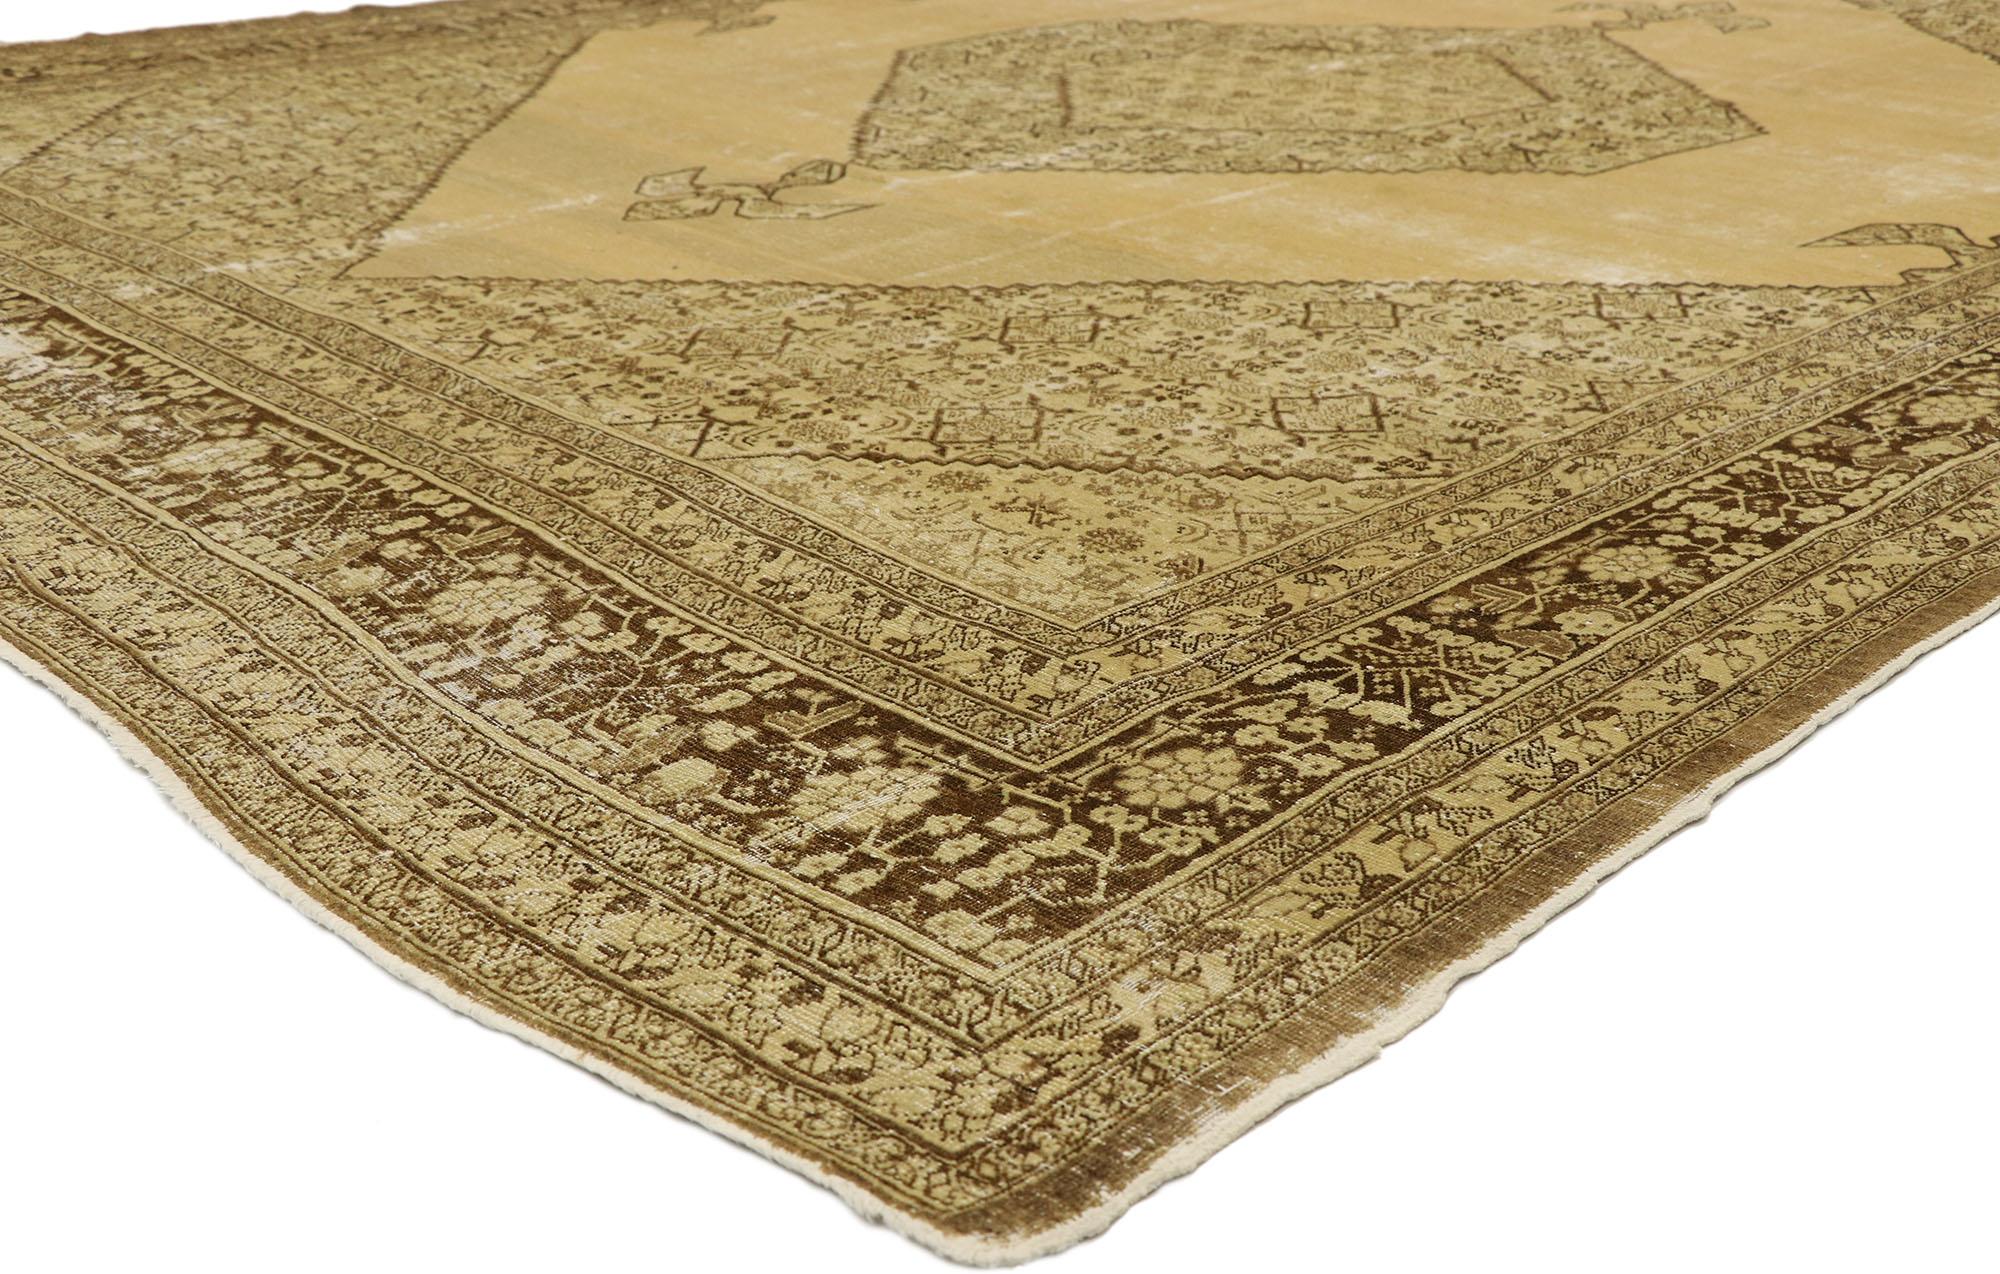 74846 Haji Khalili Distressed Antique Persian Tabriz Rug with Warm, Industrial Style. This hand-knotted wool Haji Khalili distressed antique Persian Tabriz rug features a large serrated hexagonal medallion anchored with pendants centered on an open